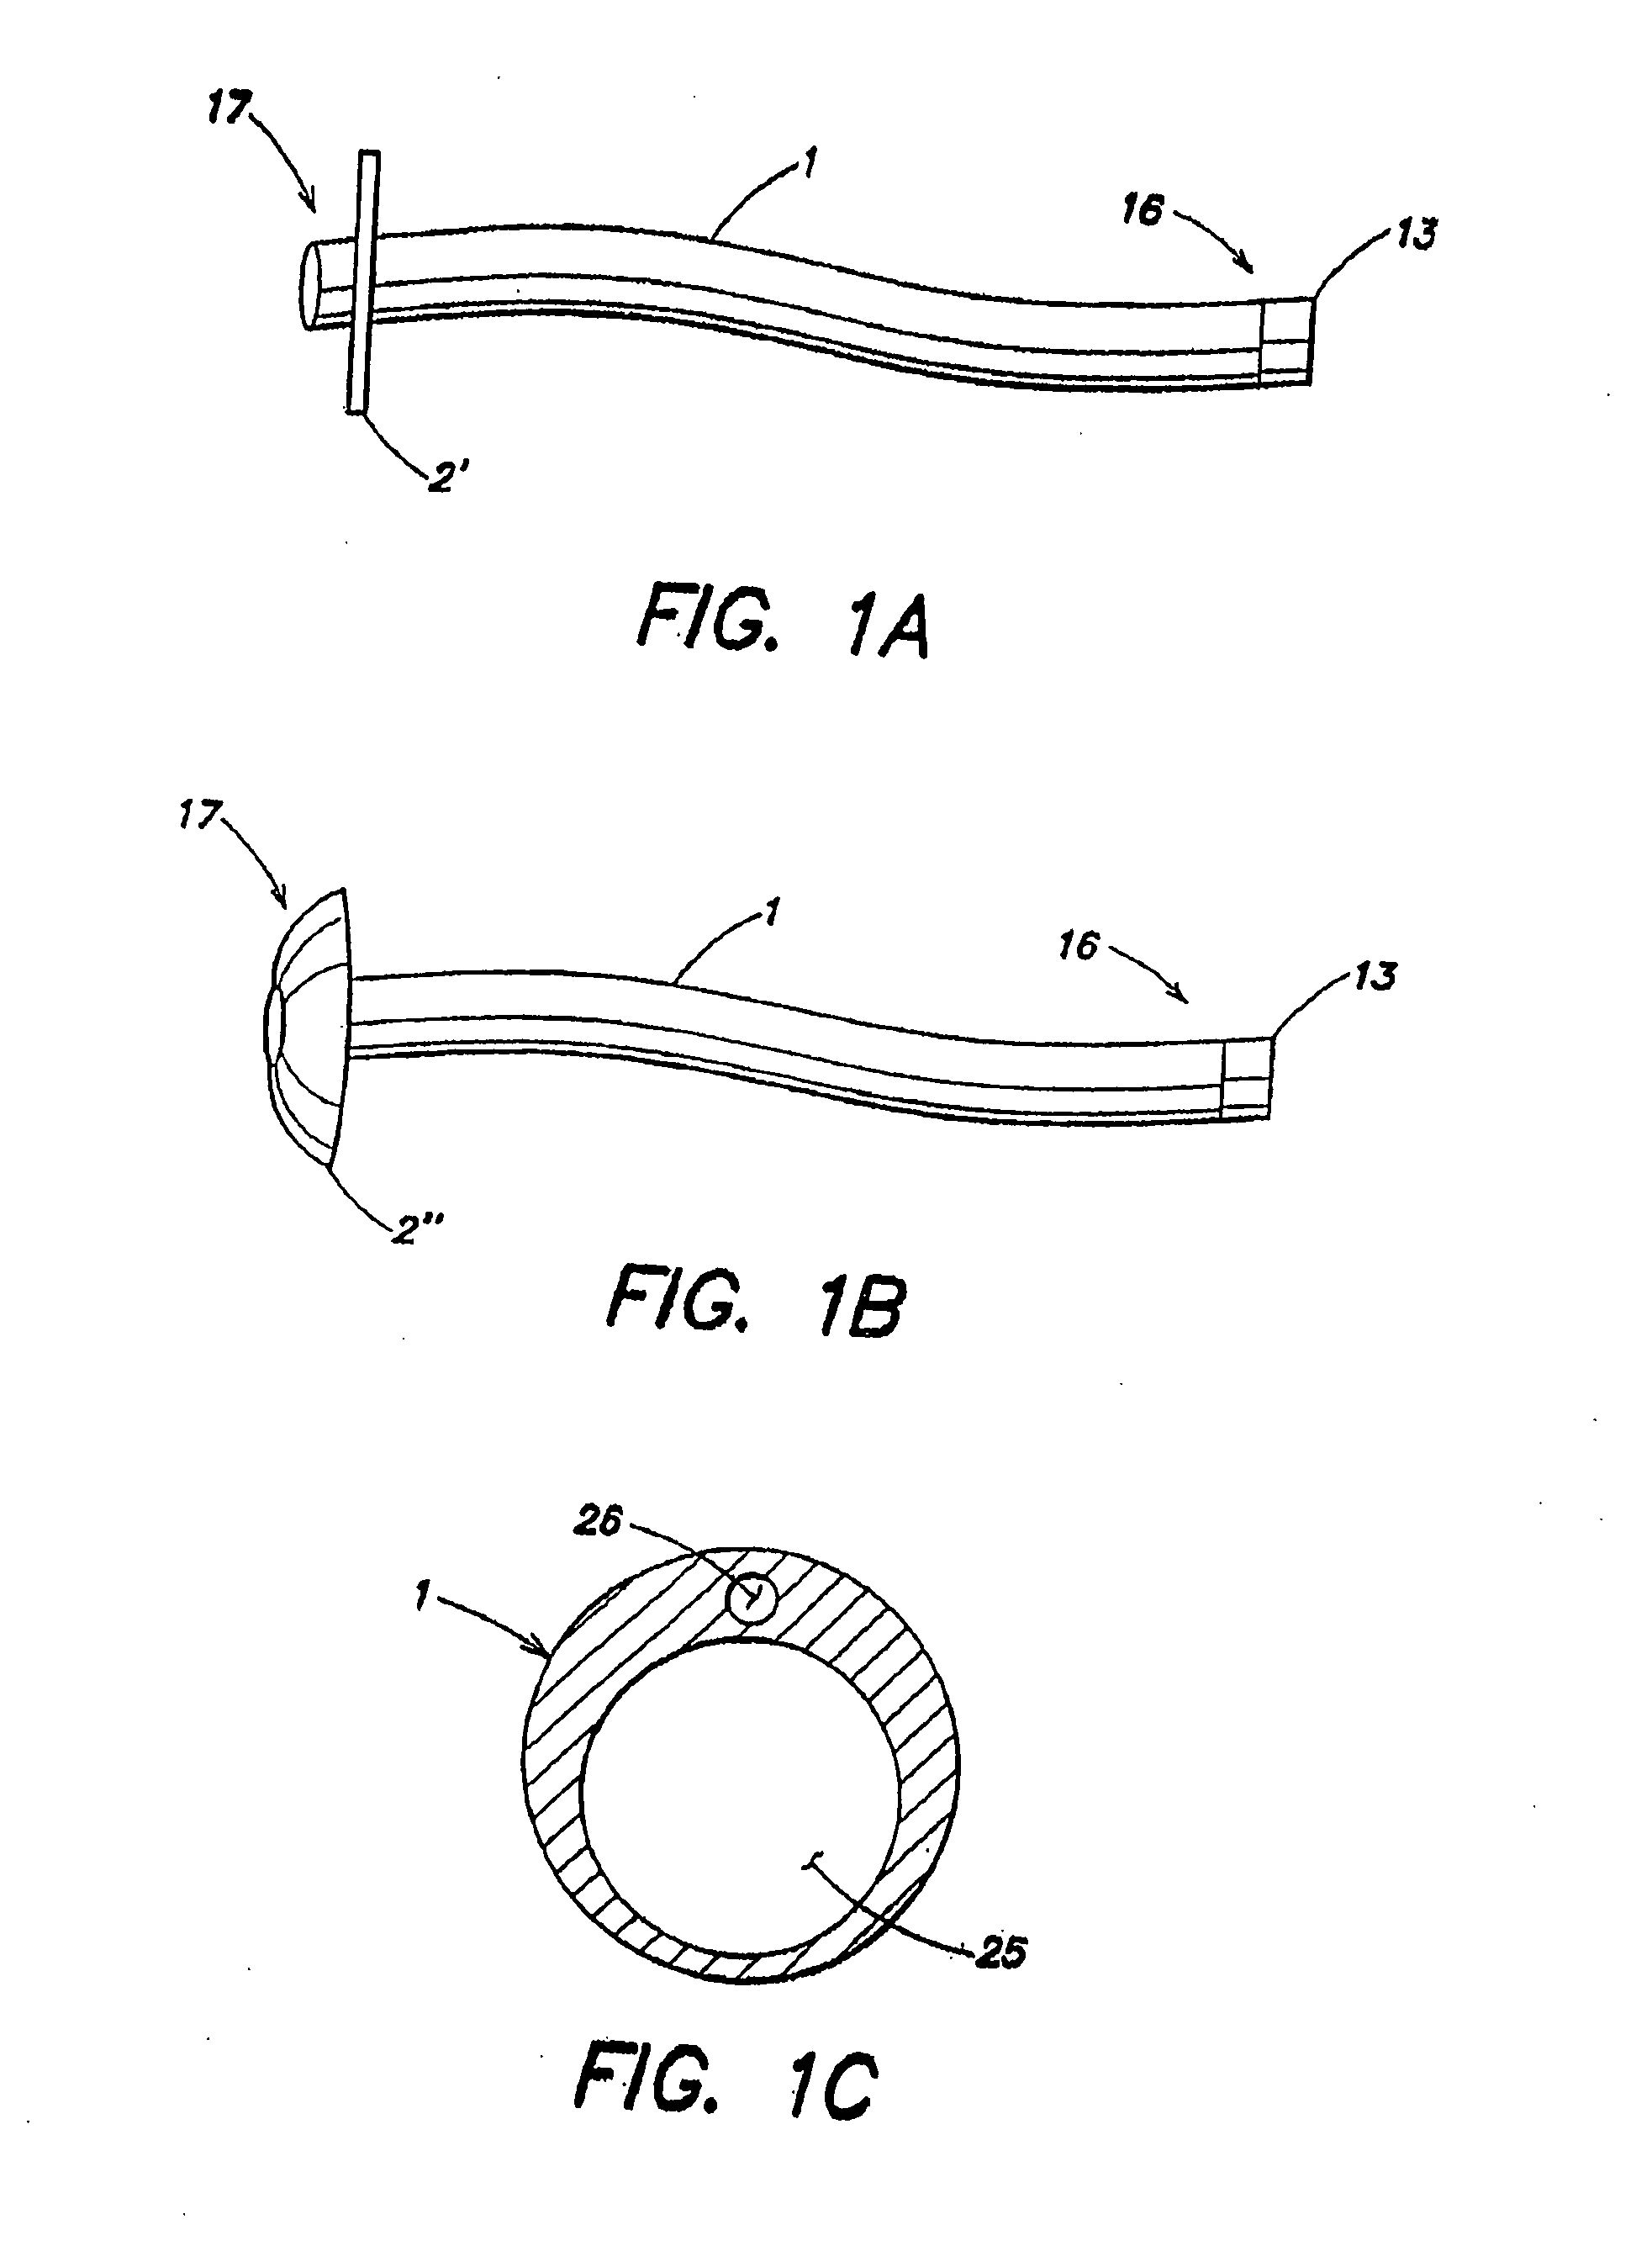 Shunt apparatus for treating obesity by extracting food